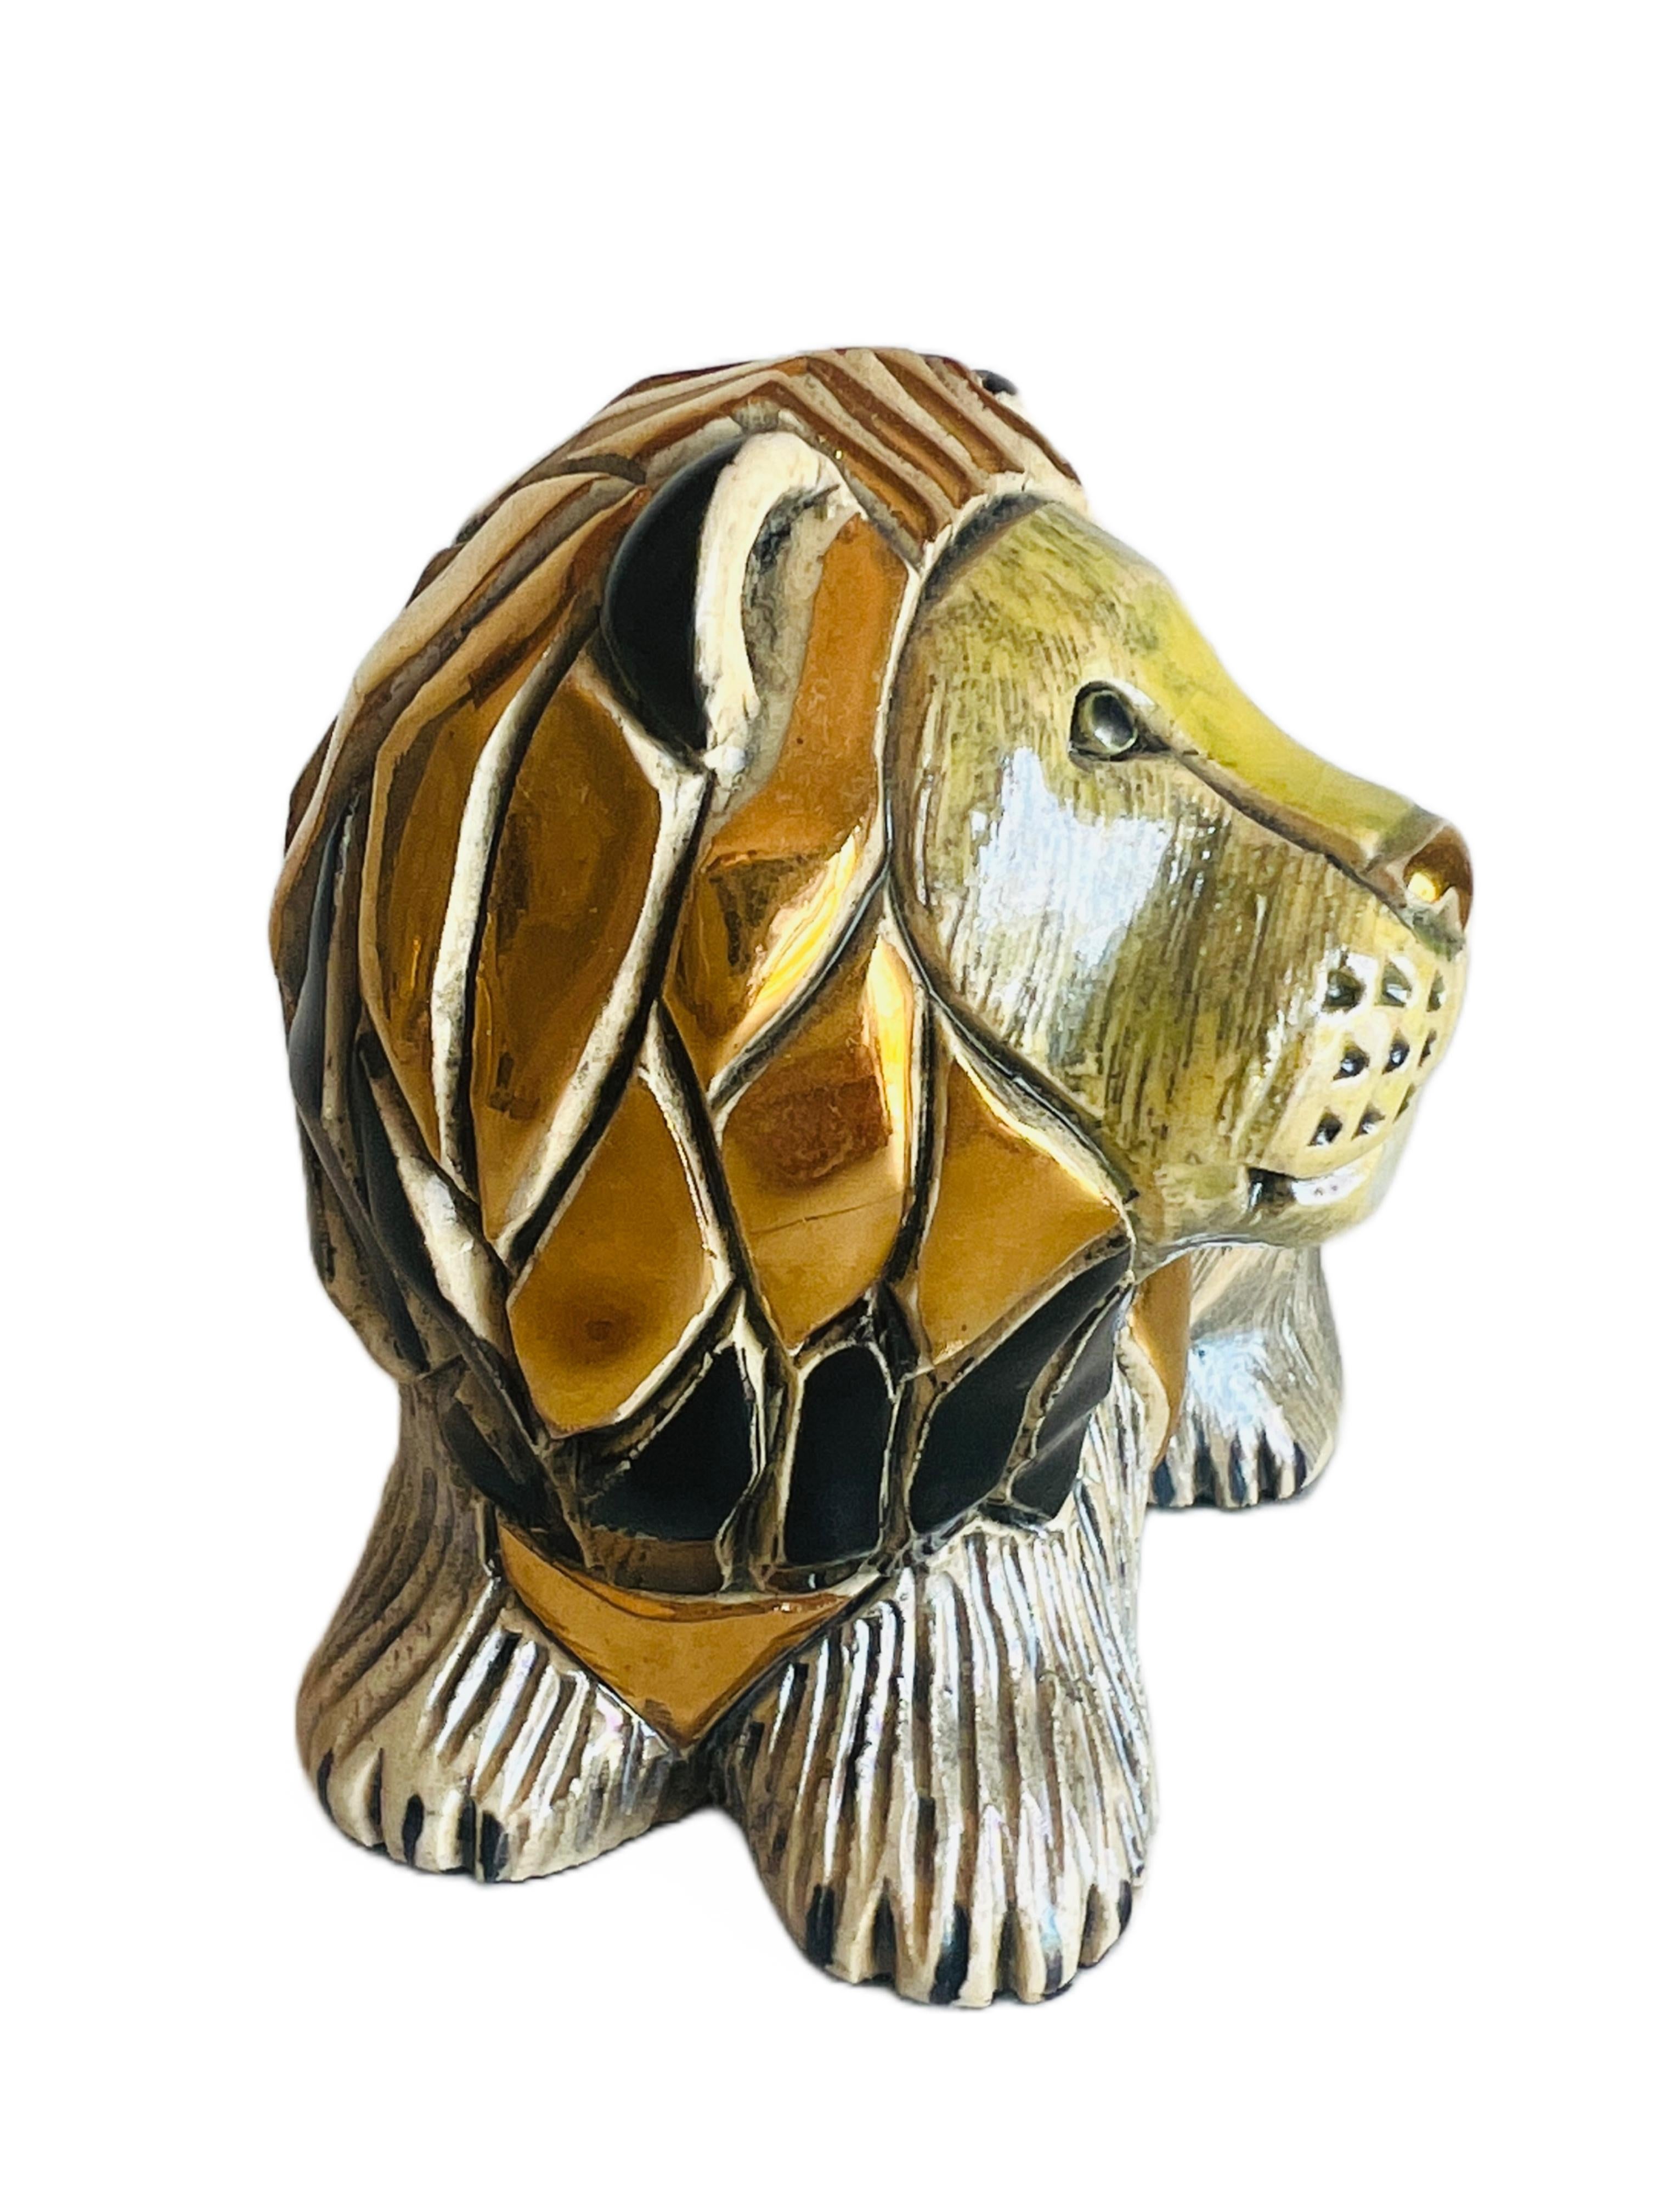 This lovely lion figurine was hand carved and decorated with platinum and gold by the Rinconada artists in Uruguay. It is part of the Silver Anniversary Collection #709 and is now retired. 

Size: 4